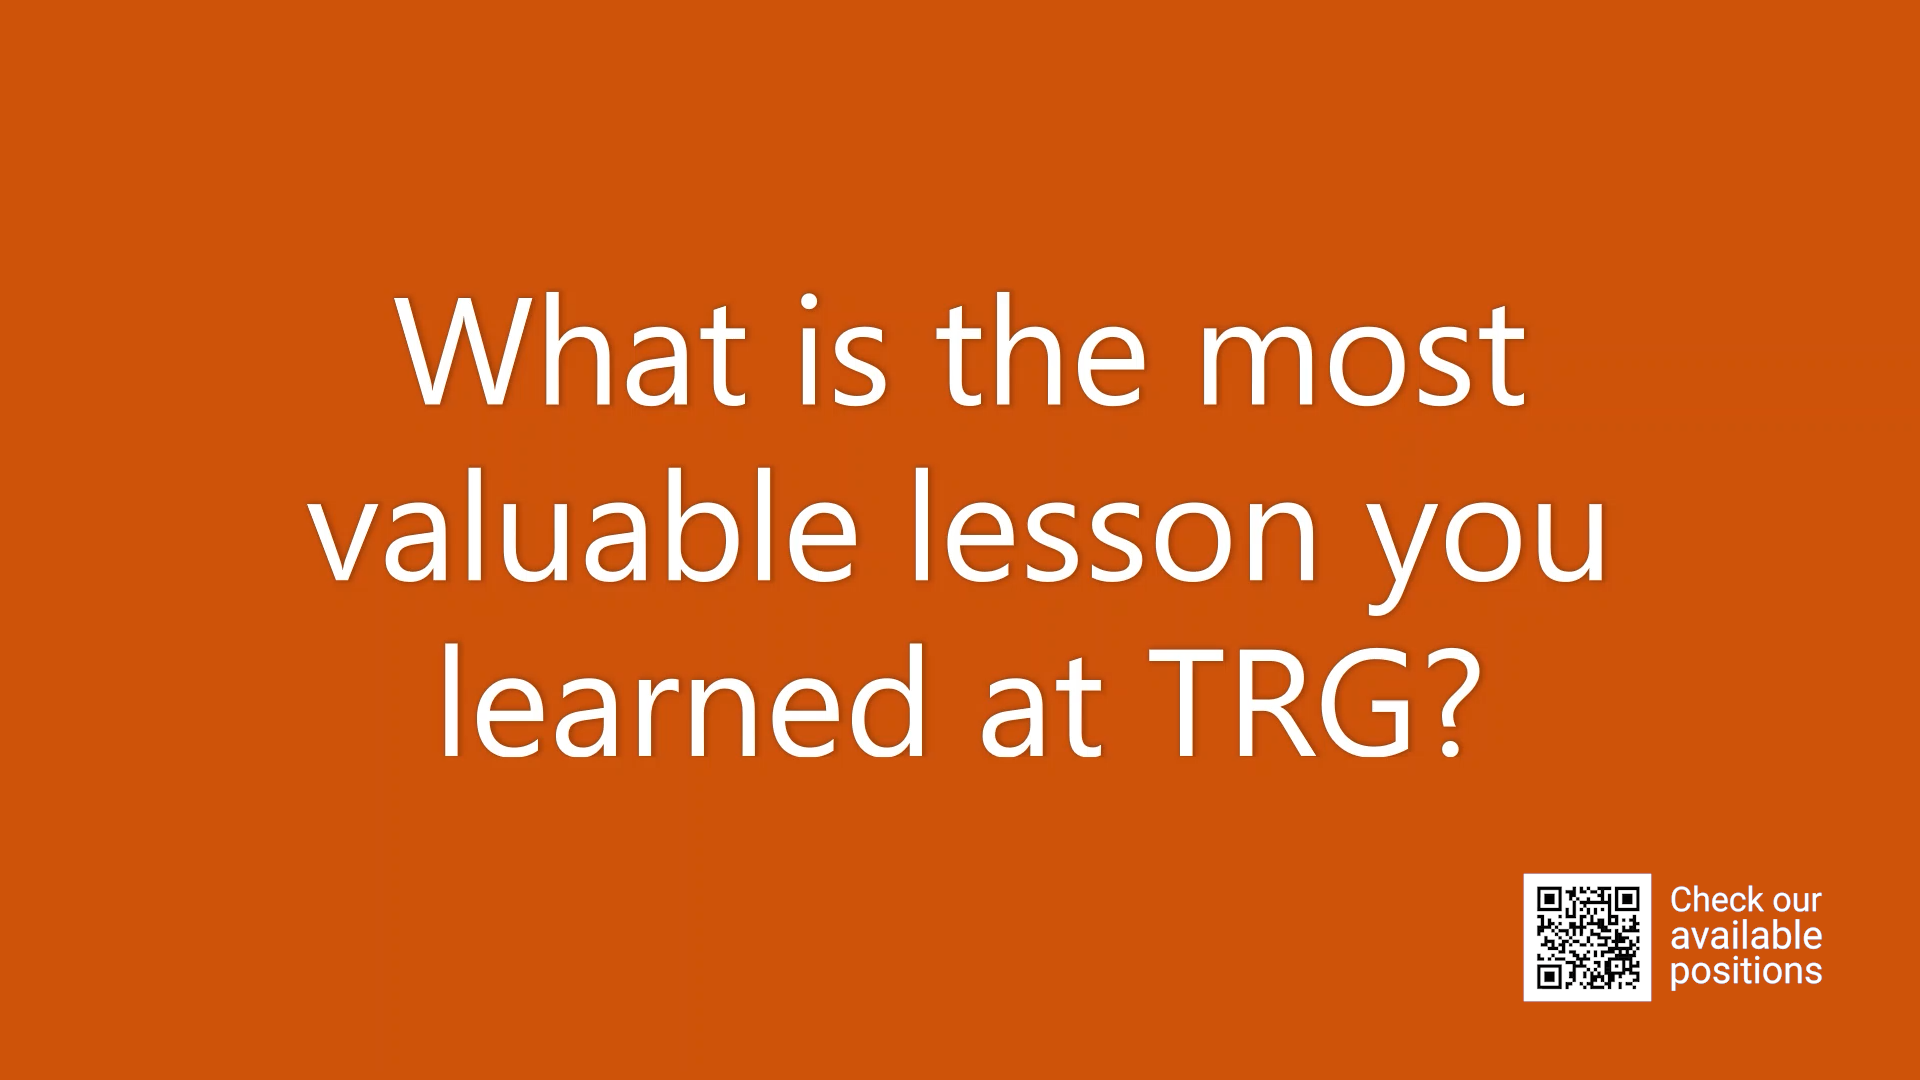 Internship testimonials - Episode 9: Most valuable lesson you learned at TRG